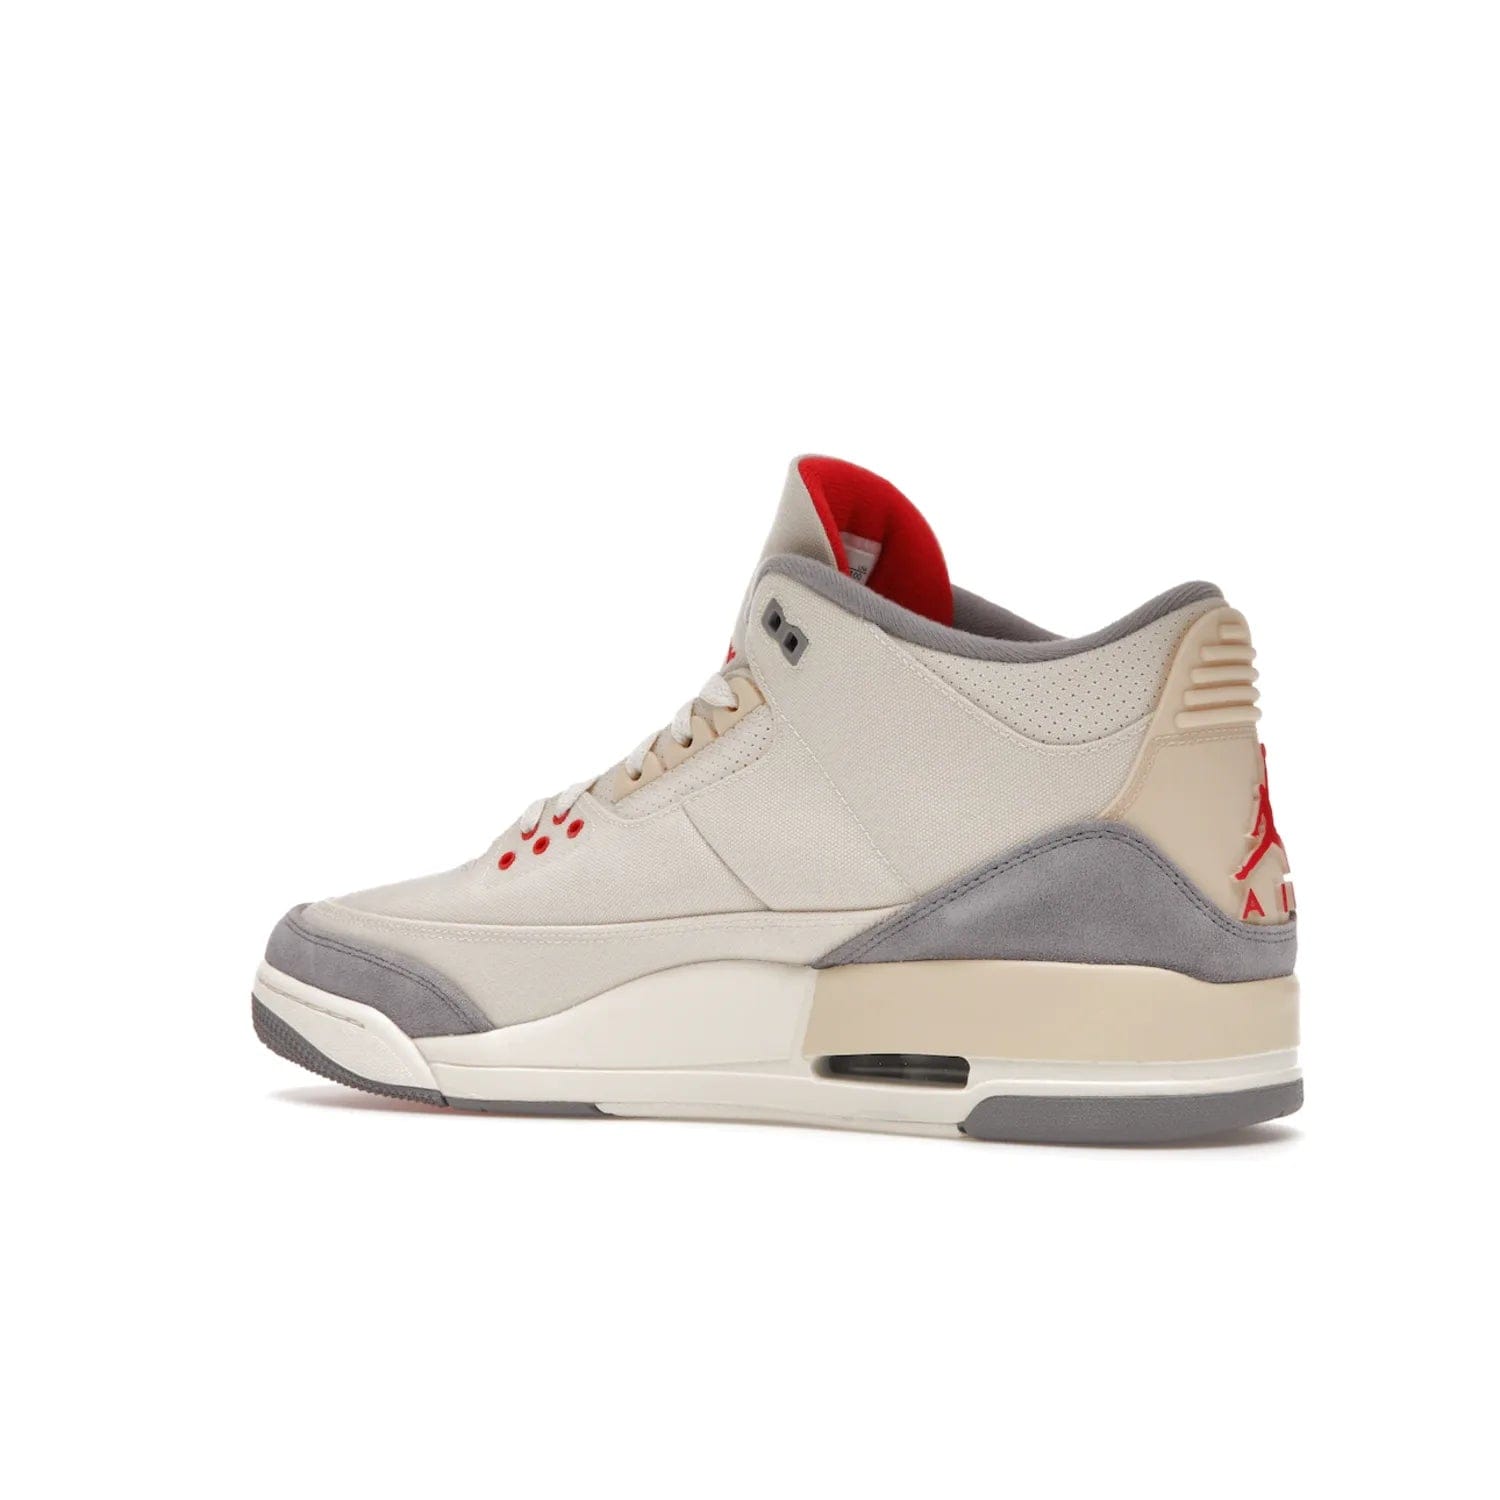 Jordan 3 Retro Muslin - Image 22 - Only at www.BallersClubKickz.com - Eye-catching Air Jordan 3 Retro Muslin in a neutral palette of grey, cream, and red. Featuring canvas upper, suede overlays and white/grey Air Max sole. Available in March 2022.